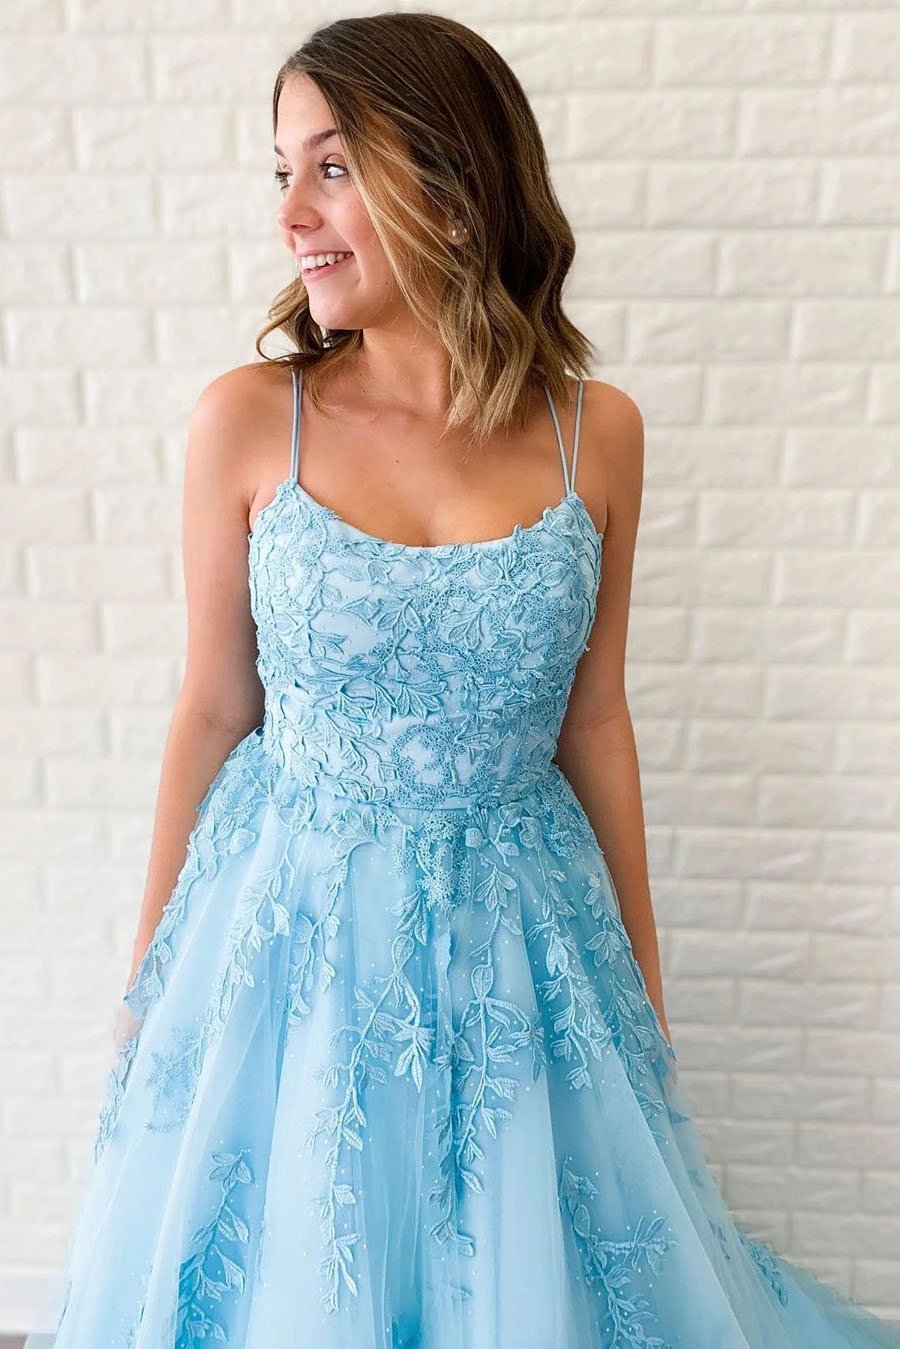 Unique A-Line Sky Blue Tulle Appliques Beads Scoop Prom Dresses with Lace STC15681